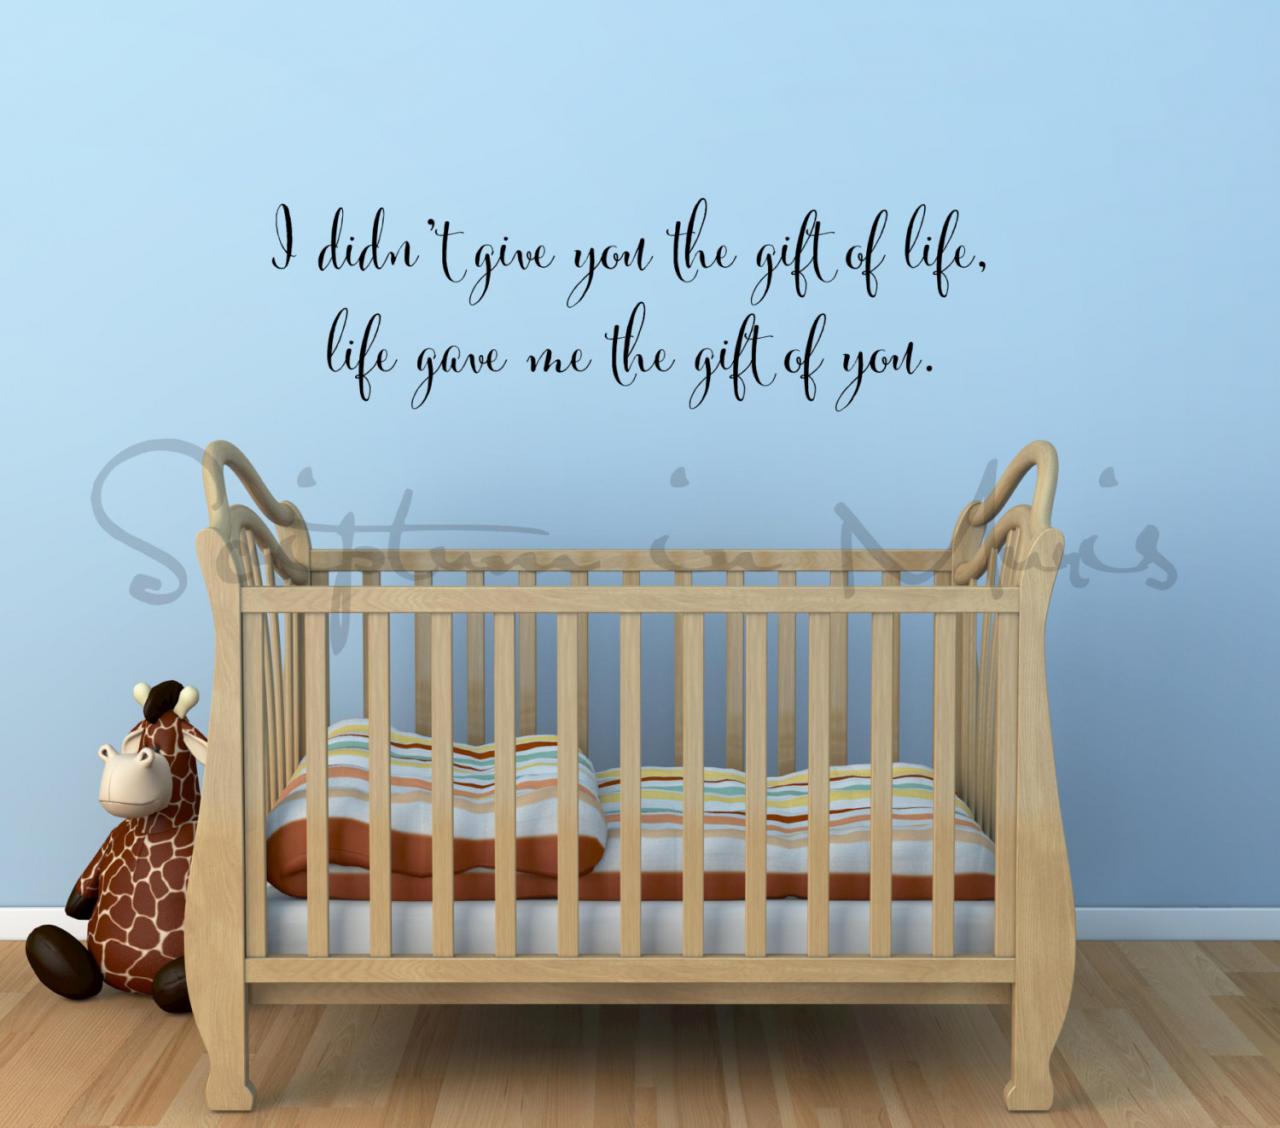 Adoption Quote I Didn't Give You The Gift Of Life, Life Gave Me The Gift Of You Wall Decal